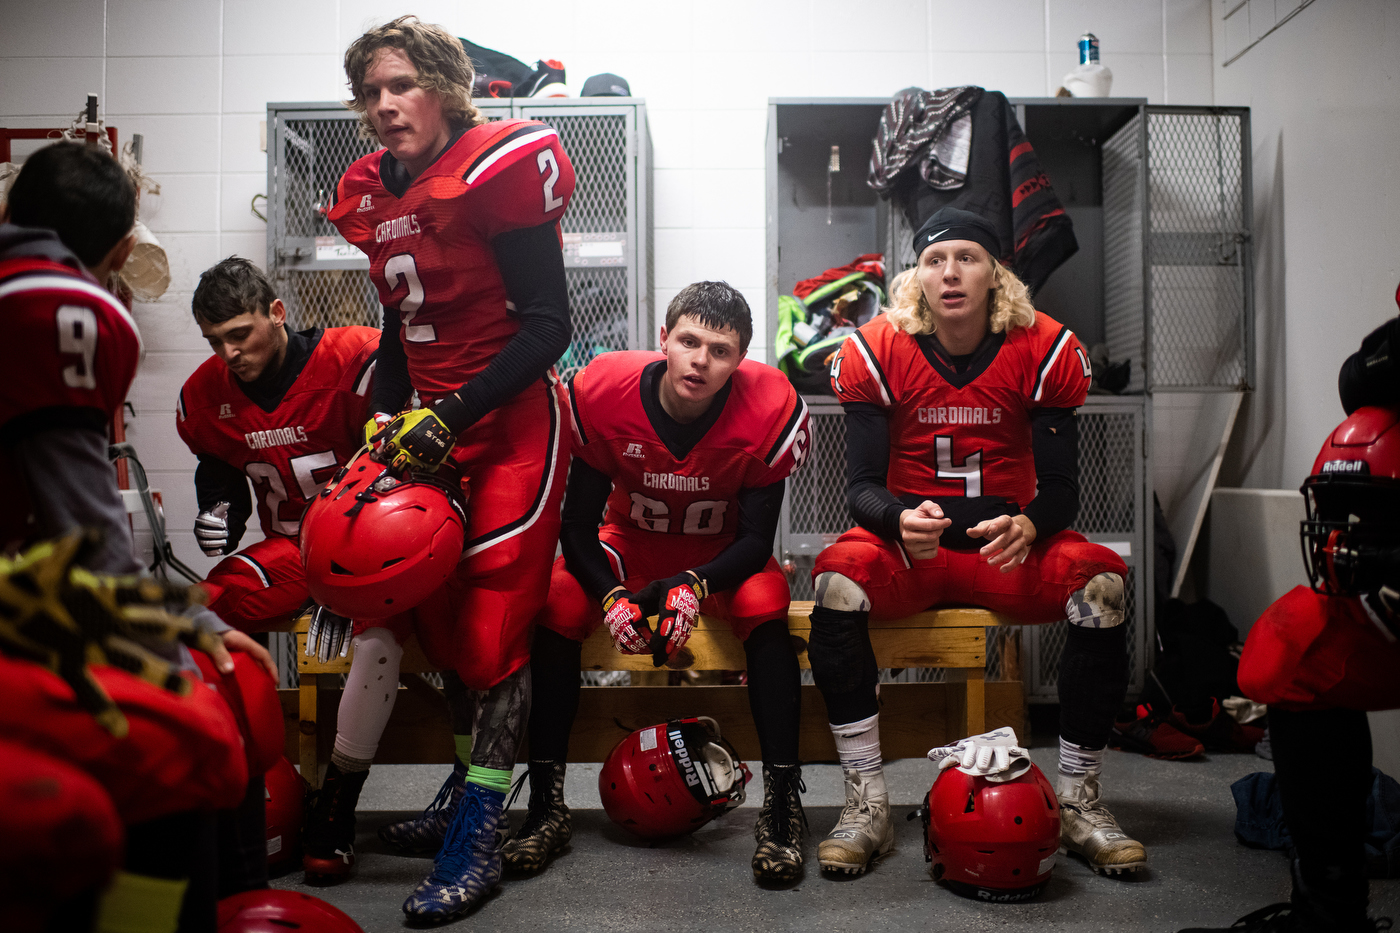  Players take a break in a high school locker room during the Bison Cardinals’ game versus northern rivals, the Lemmon-McIntosh Cowboys in Bison, SD. 